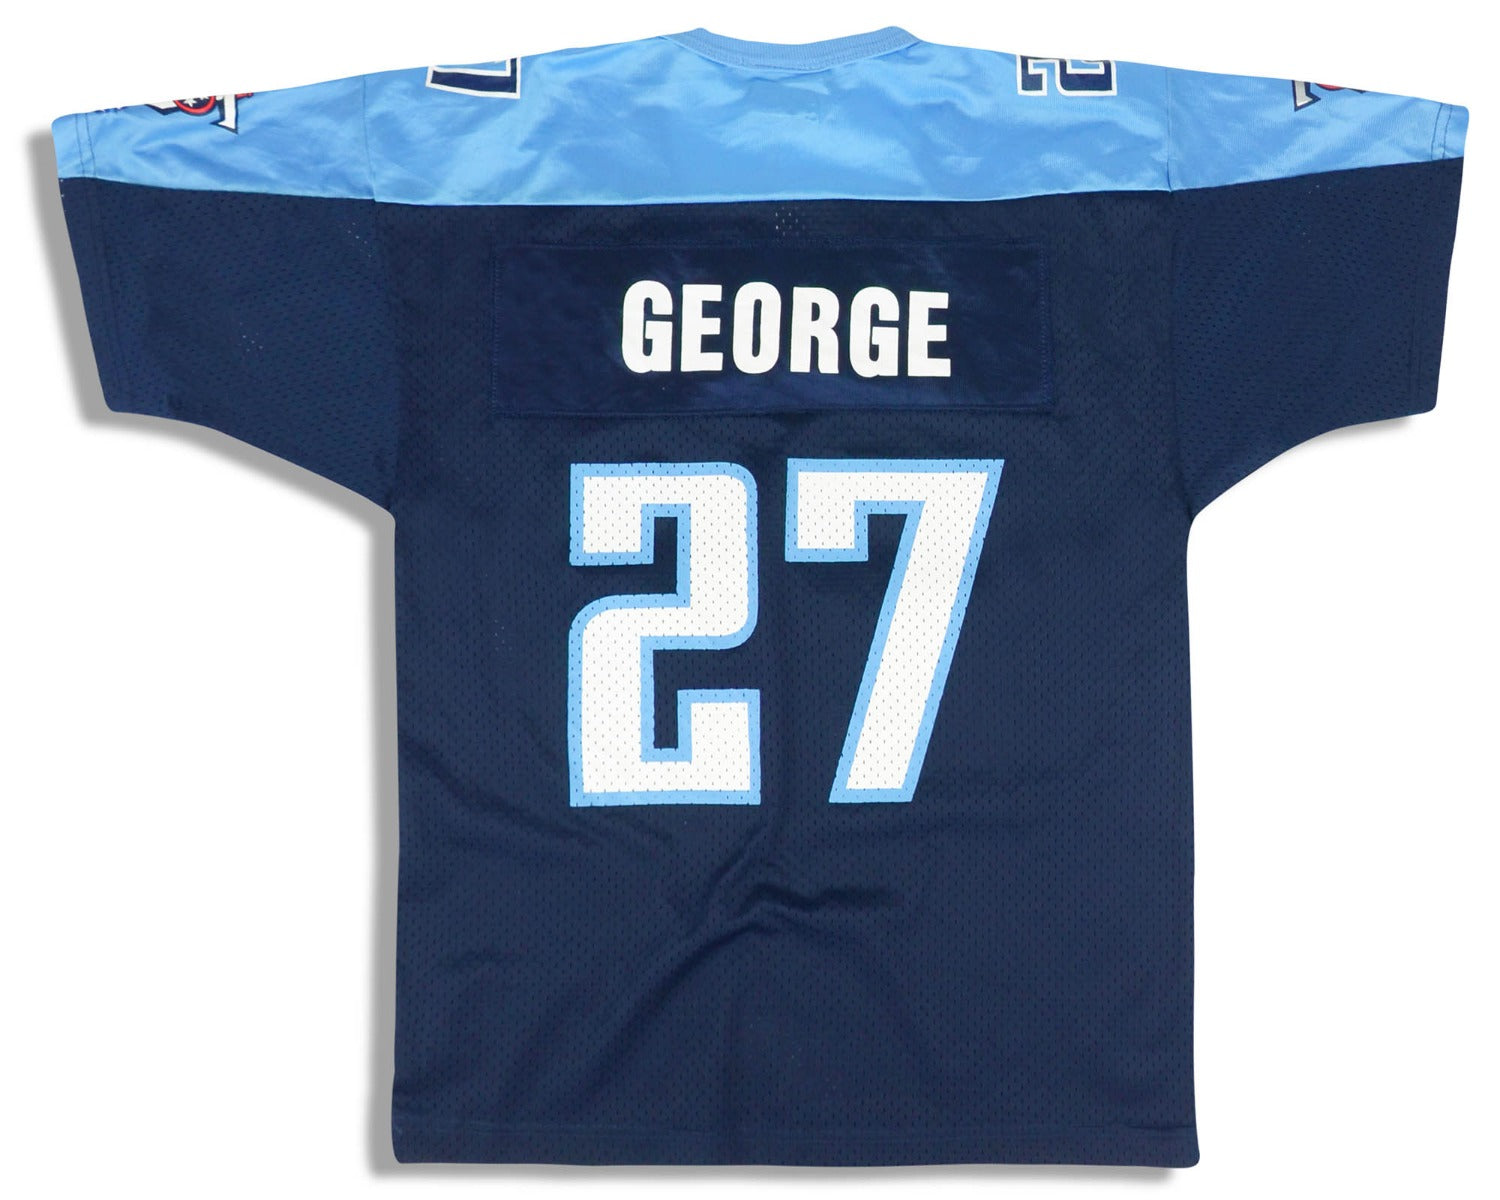 1999-00 TENNESSEE TITANS GEORGE #27 CHAMPION JERSEY (HOME) M